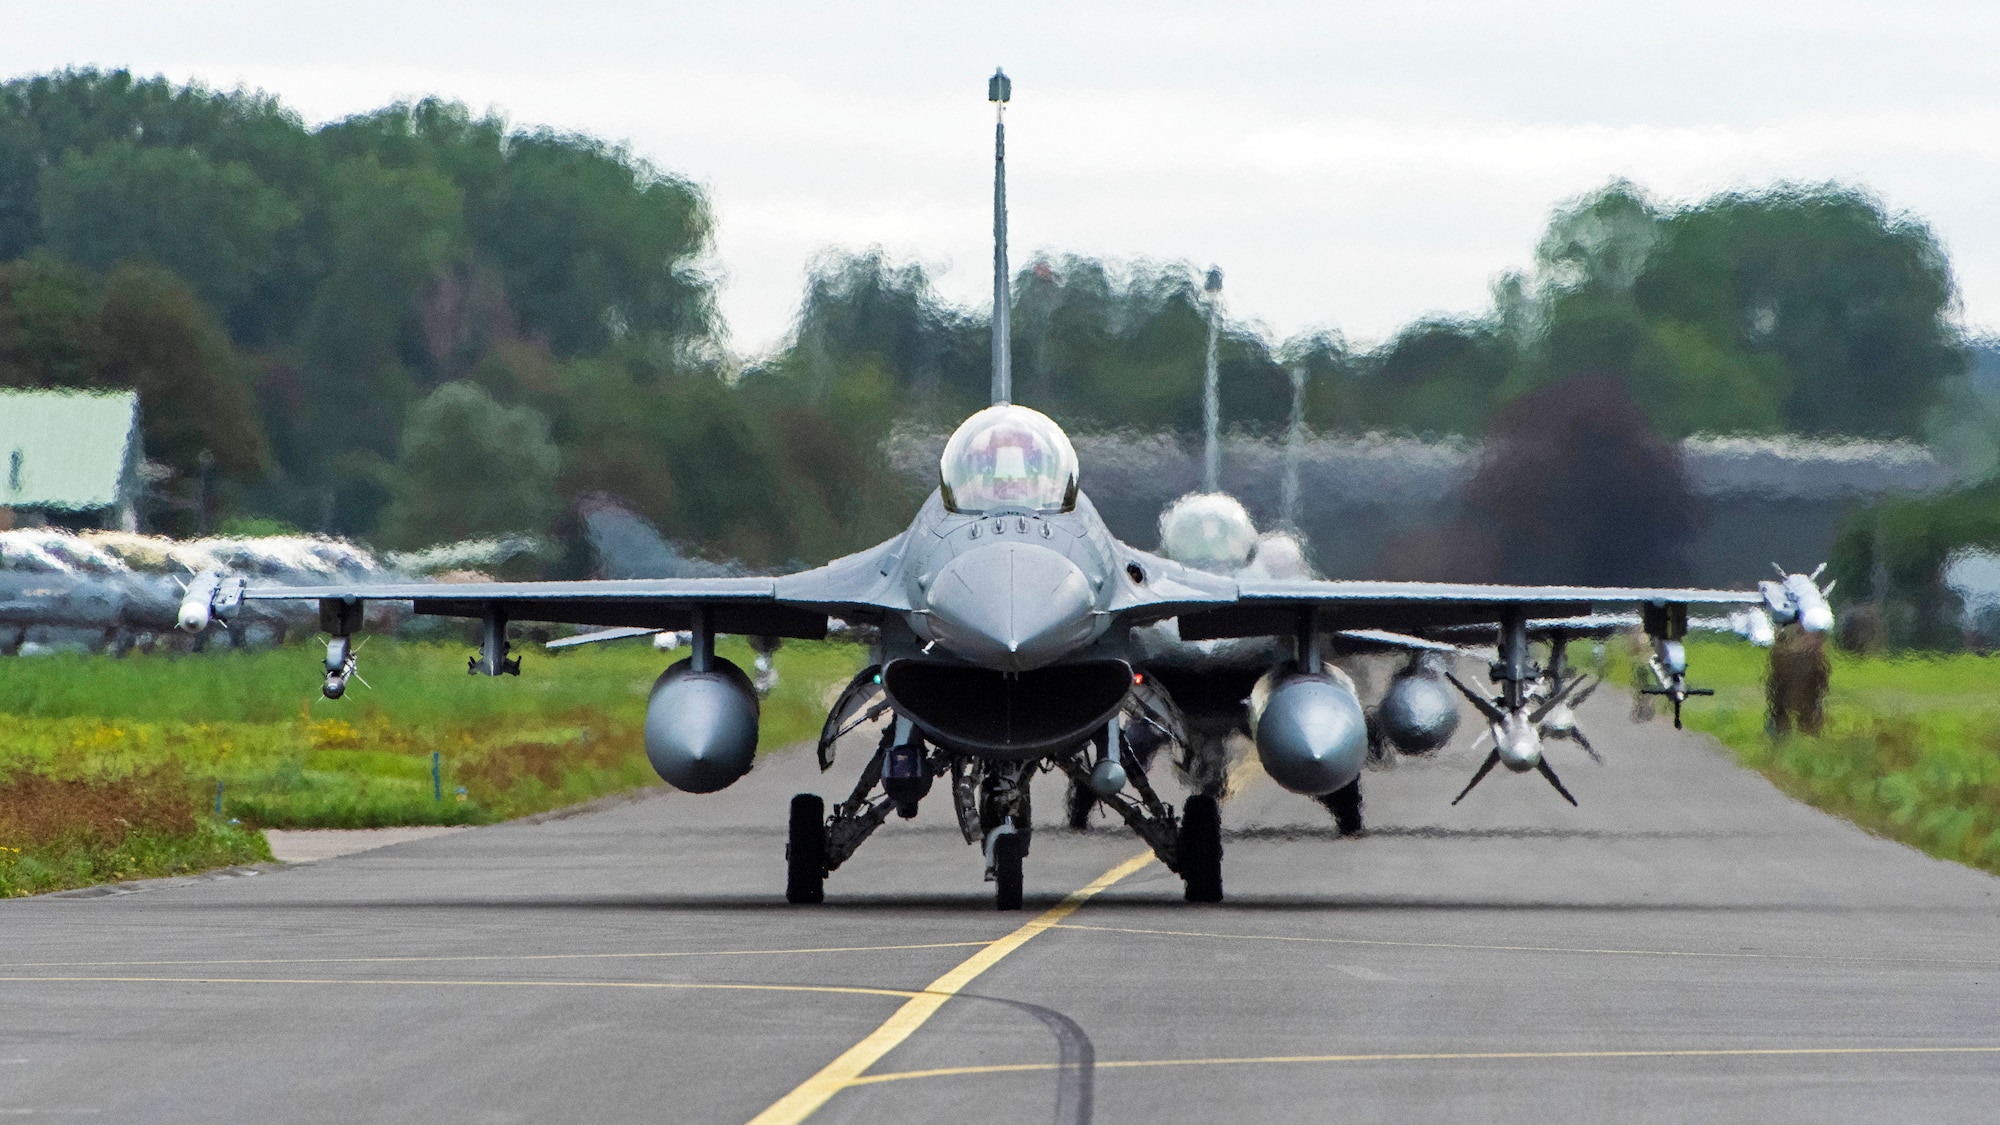 U.S. Air Force F-16 Fighting Falcons assigned to the 480th Fighter Squadron, from Spangdahlem Air Base, Germany, taxi at Leeuwarden Air Base, Netherlands, Sept. 13, 2021. They integrated with coalition F-16 Fighting Falcon and F-35 Lightning II fighter aircraft during the Suppression of Enemy Air Defense phase of a weapons instructor course that also included aircraft from Belgium, the Netherlands and Norway. (U.S. Air Force photo by Tech. Sgt. Anthony Plyler)